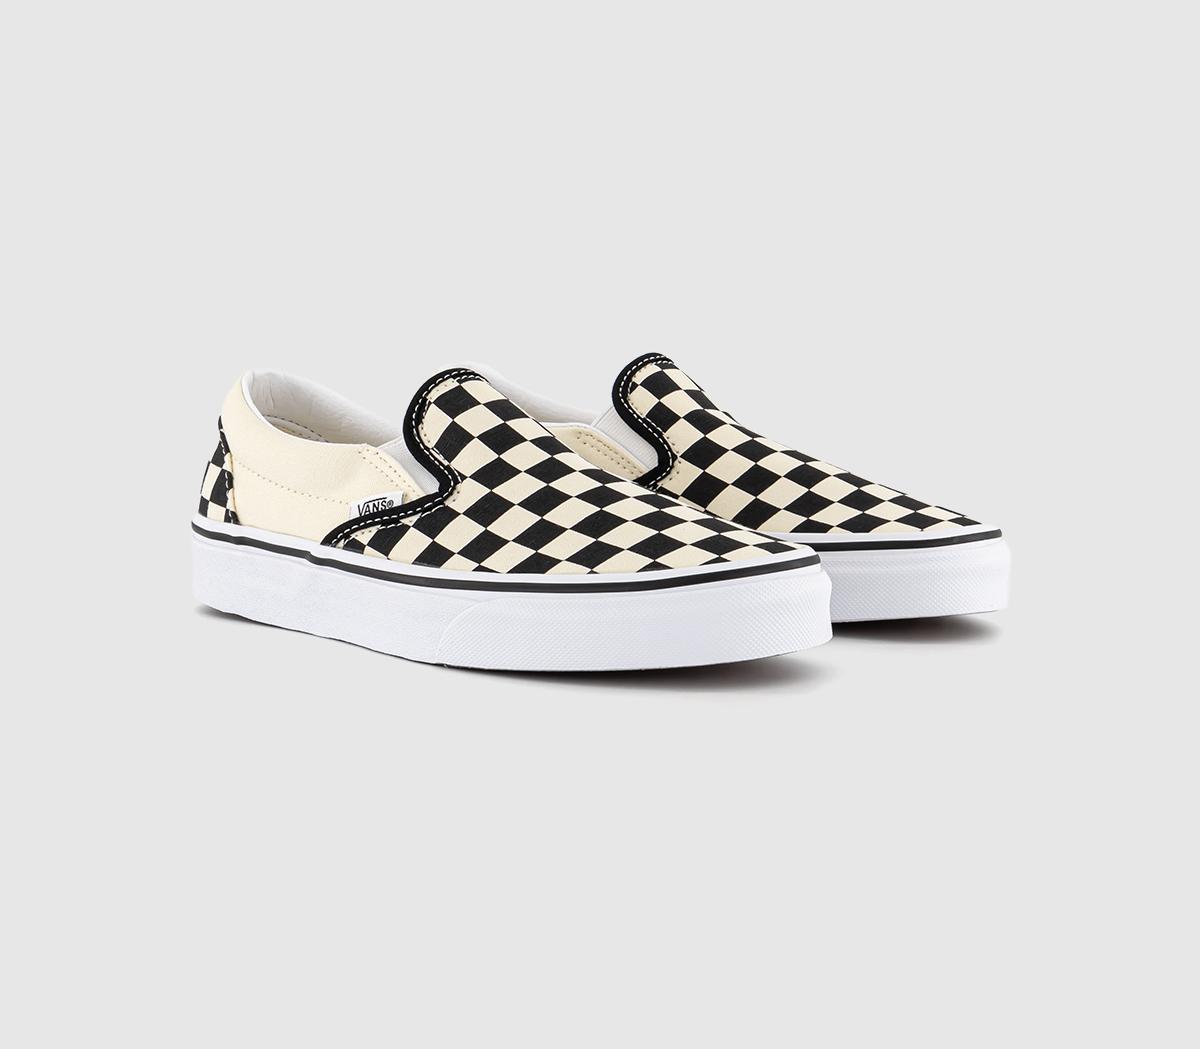 Mens Vans Classic Slip On Check Trainers In Black And White, 10